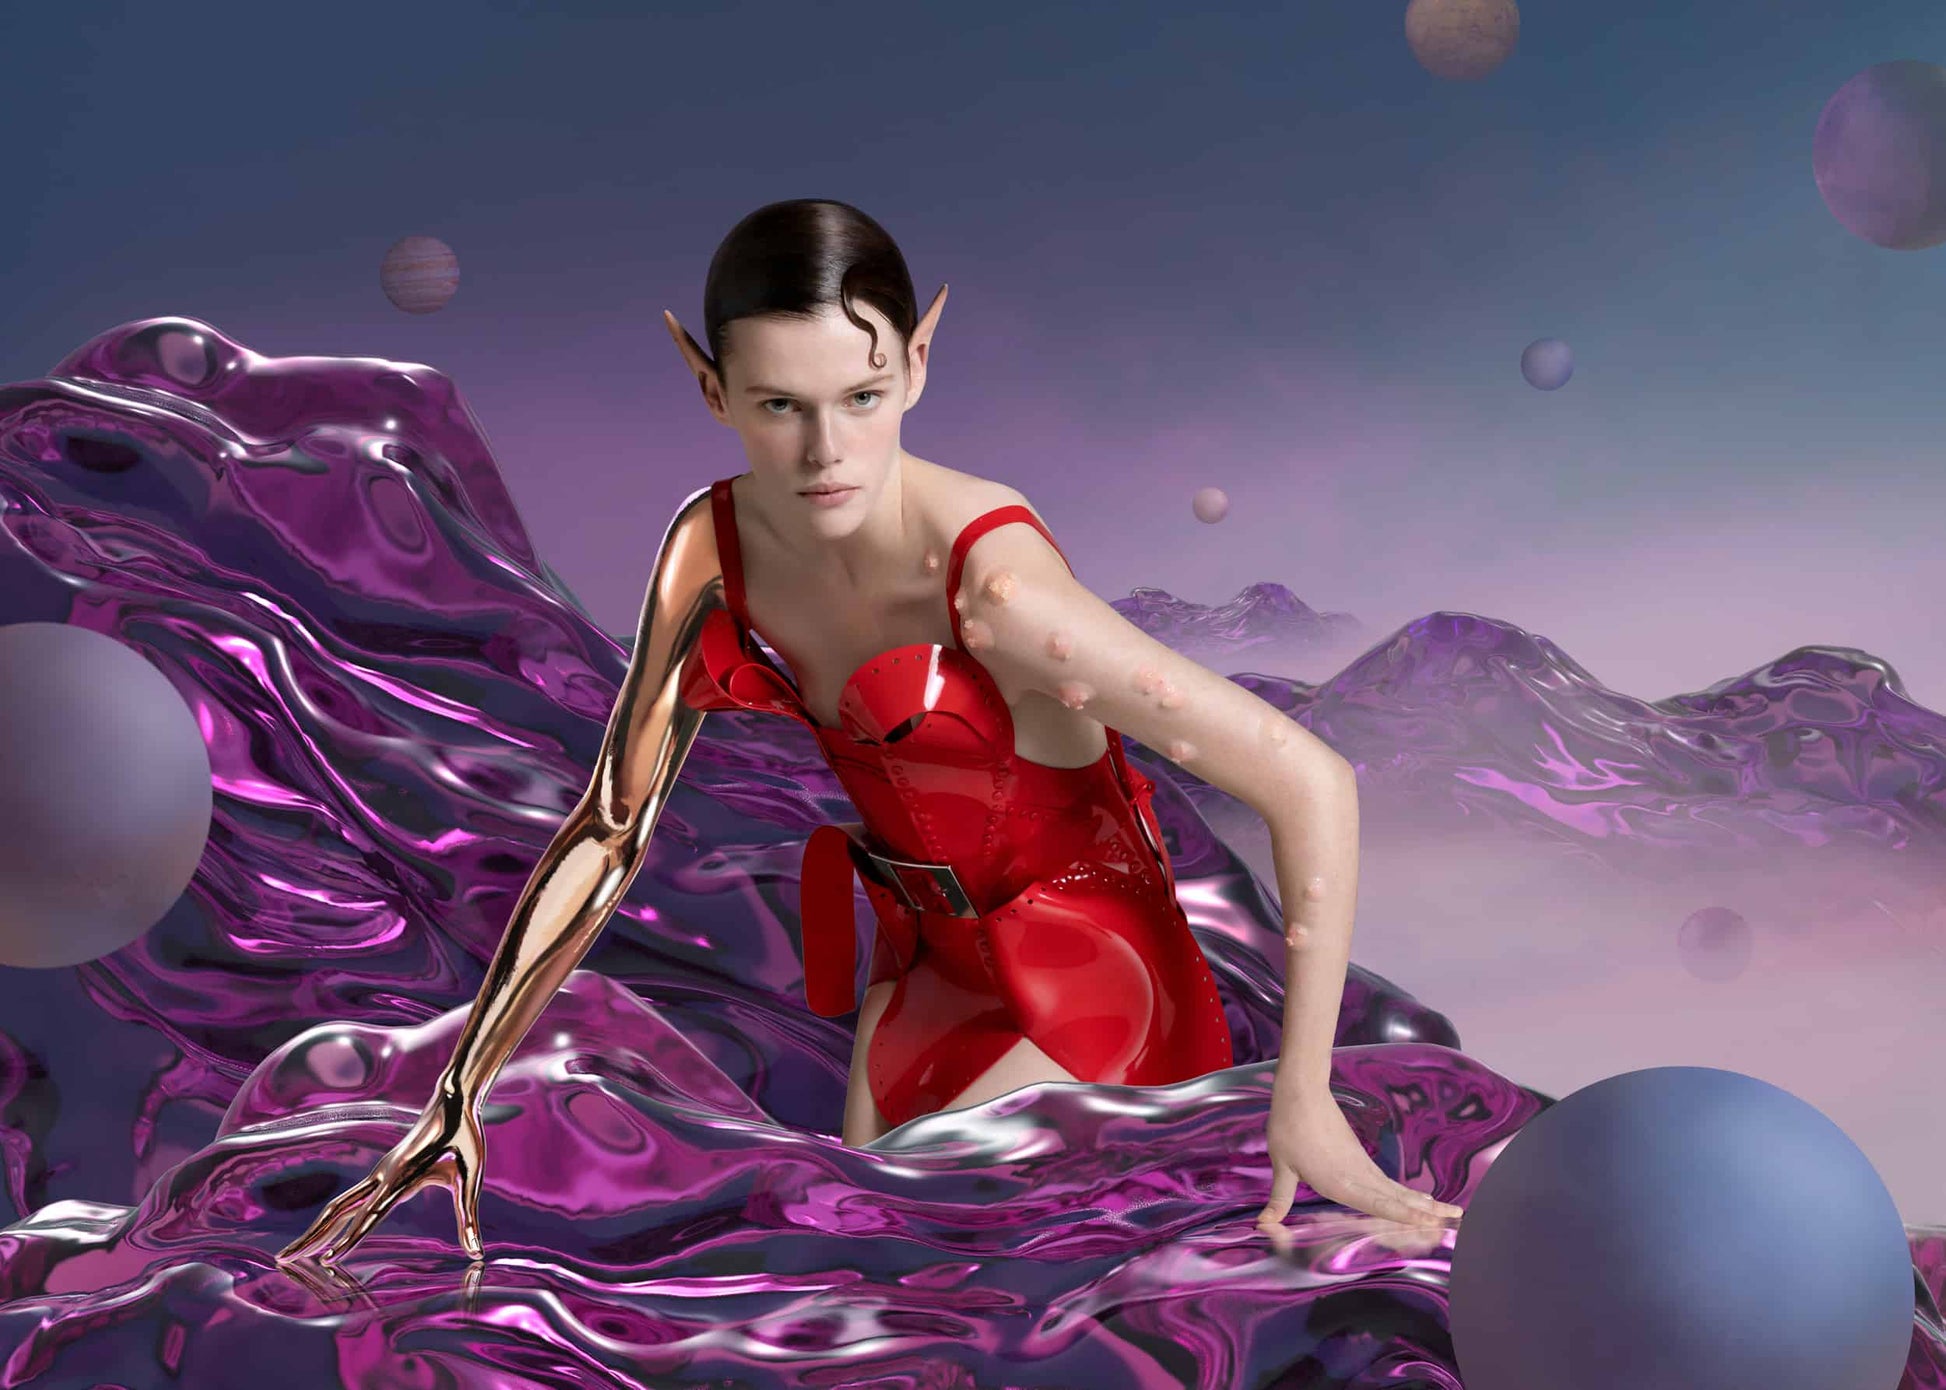 The artpiece 'Universe' by Yang Han from the series Encounter Future shows a futuristic cyber woman in a red dress, looking straight at the camera.